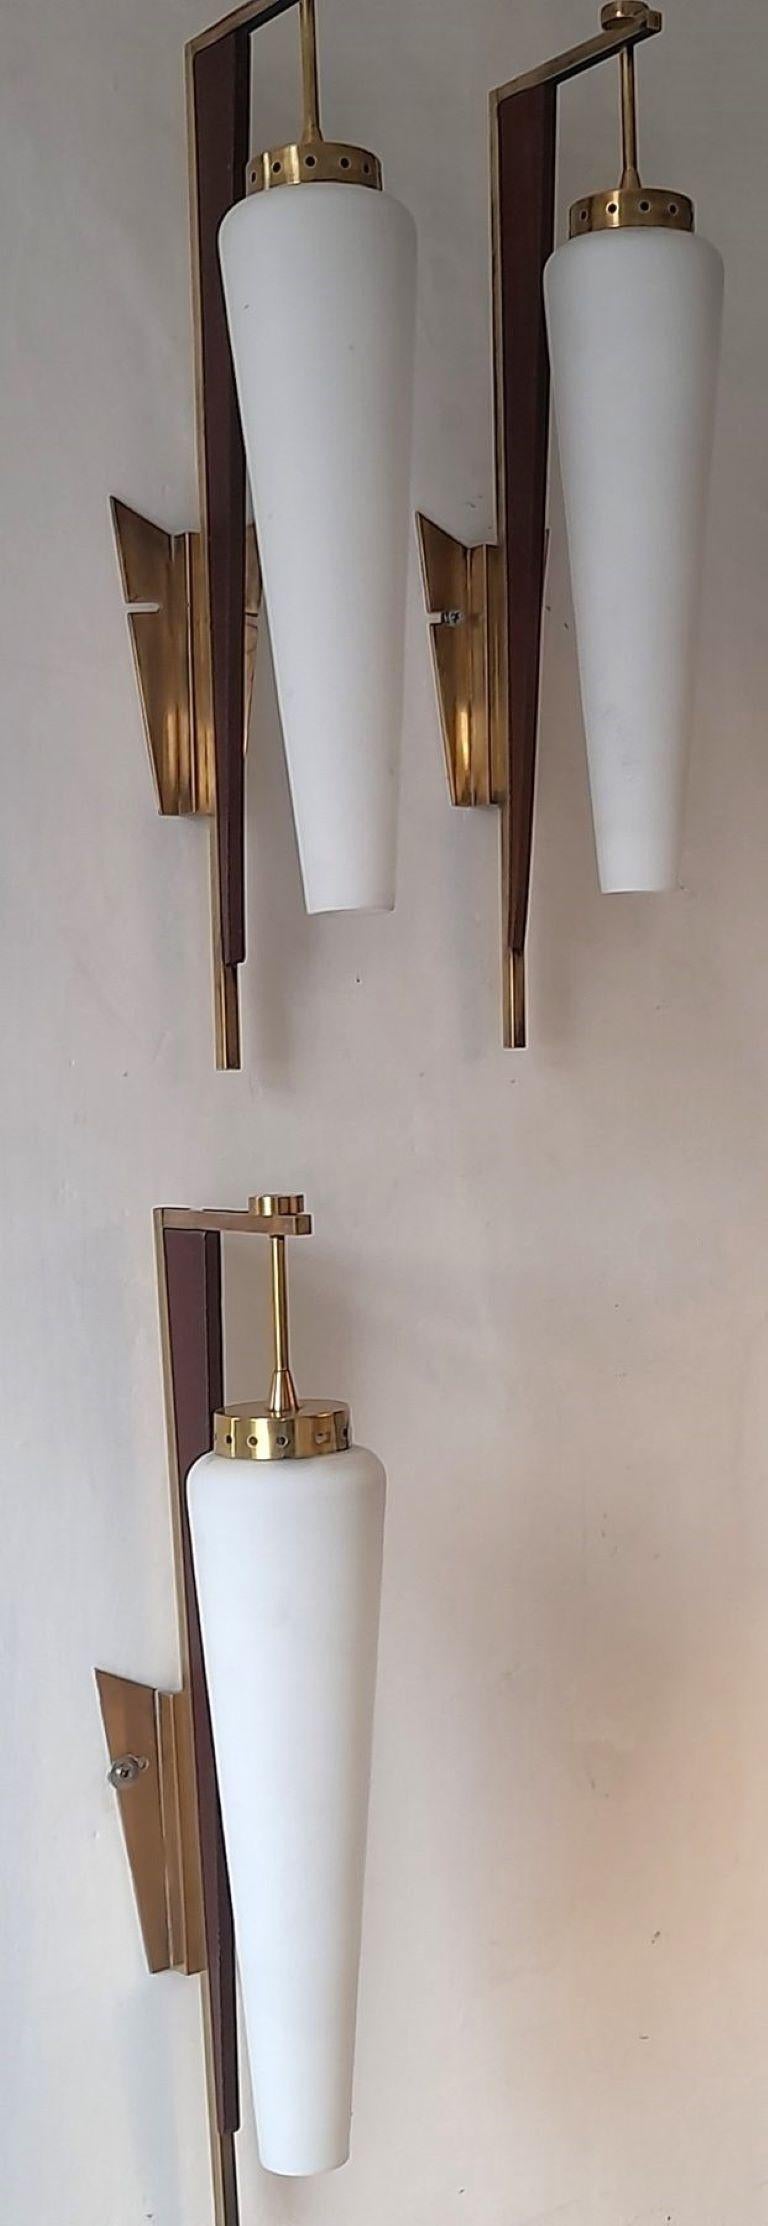 Set of three rare, tall wall lights by Stilnovo, Italy, 1950, modernist and clear lines design, brass galery with wood accents and opal glass shades. All three sconces in good original vintage condition, brass with some wear and aged patina,  no